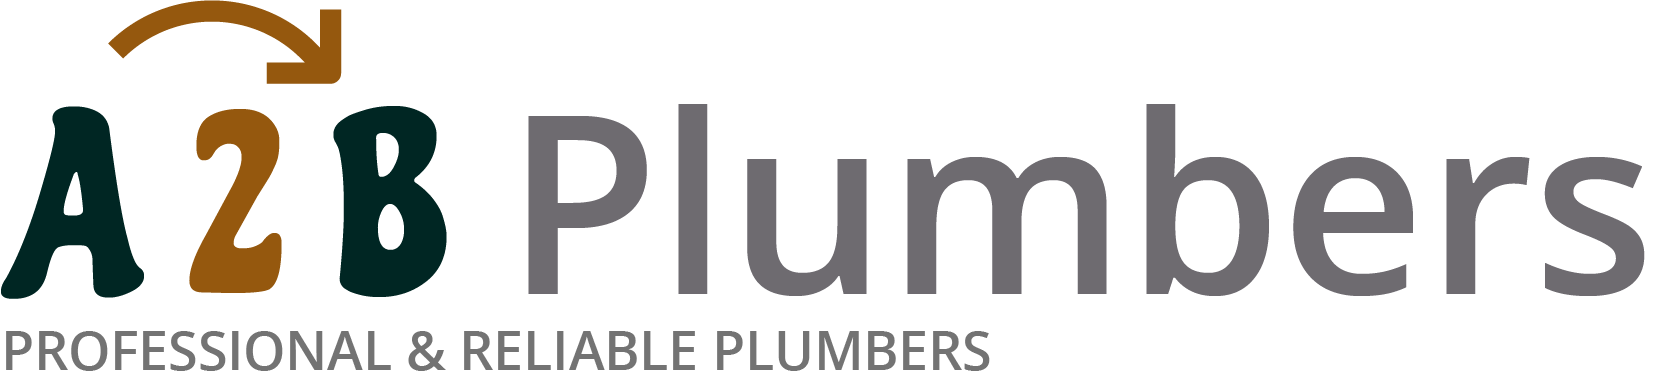 If you need a boiler installed, a radiator repaired or a leaking tap fixed, call us now - we provide services for properties in Rustington and the local area.